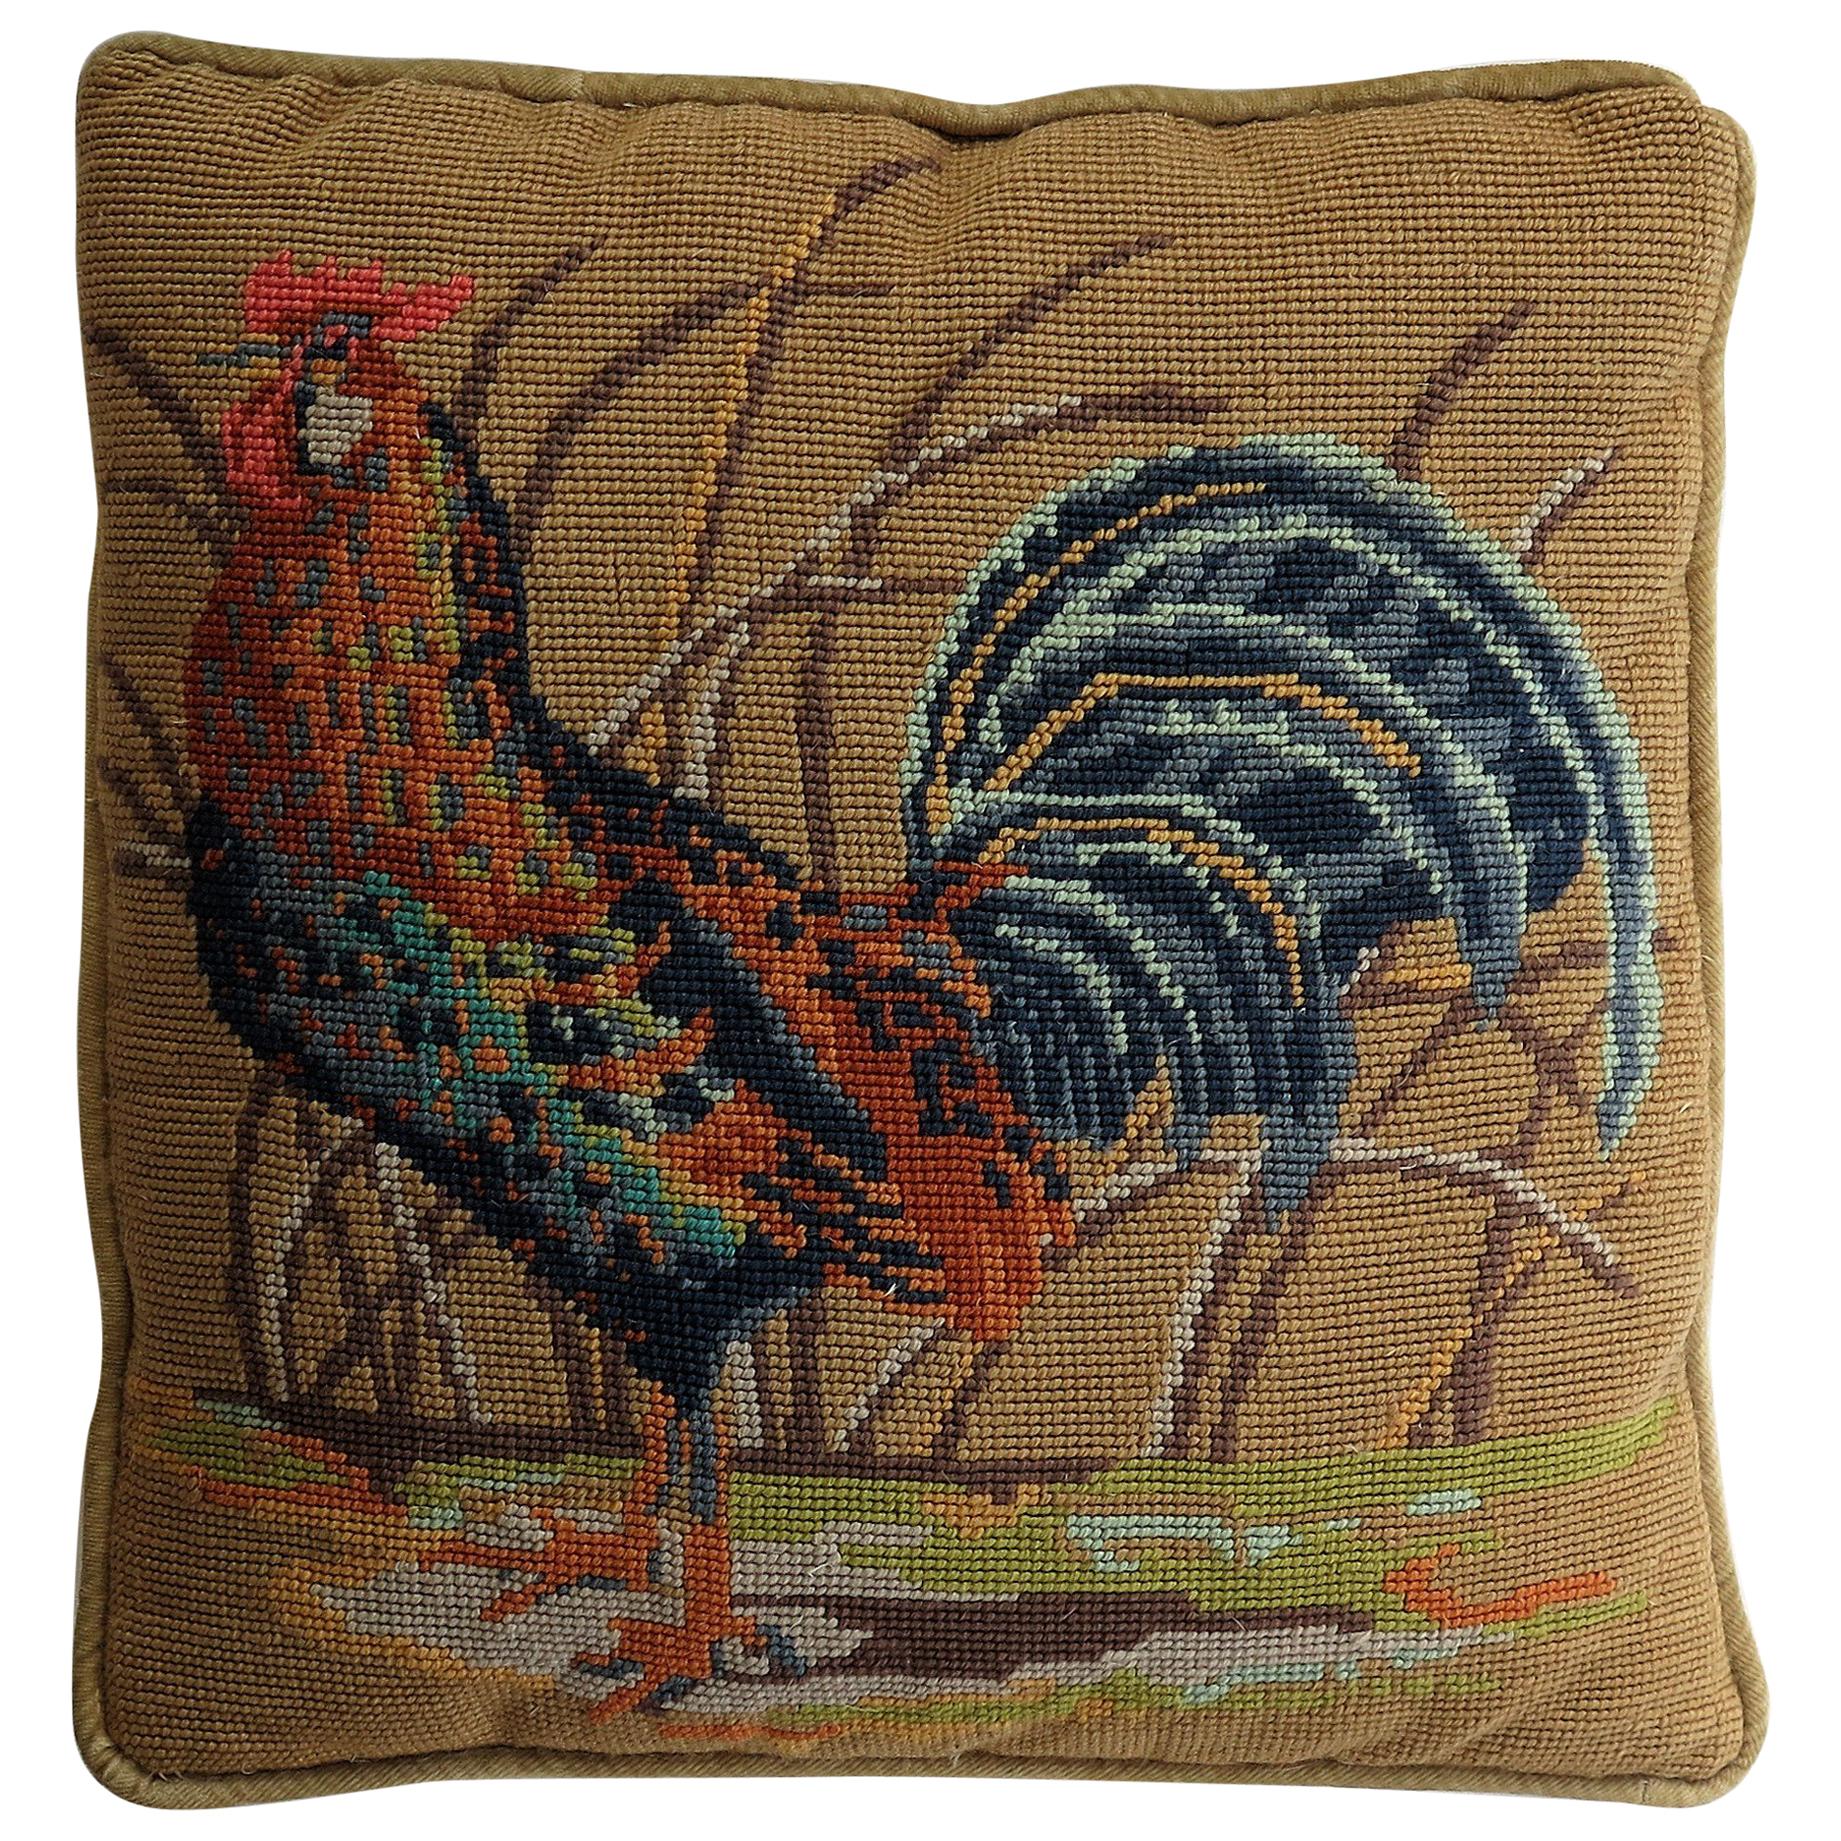 Needlepoint Tapestry Cushion or Pillow of Rooster or Cockerel, circa 1940